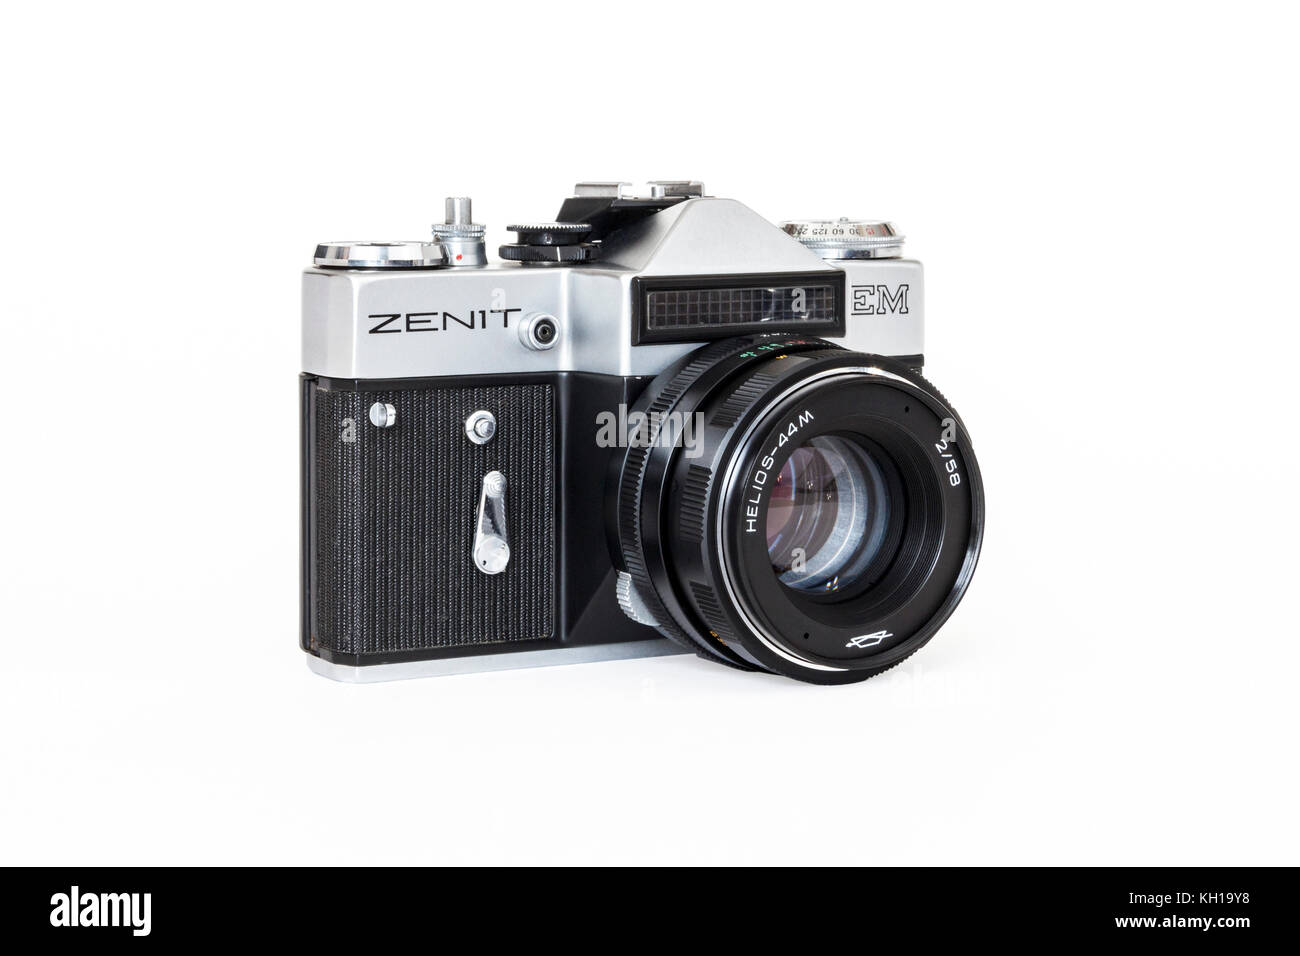 Zenit EM 35mm SLR 35mm roll film camera with 50mm lens, 1980s, made in USSR, isolated against a white background Stock Photo